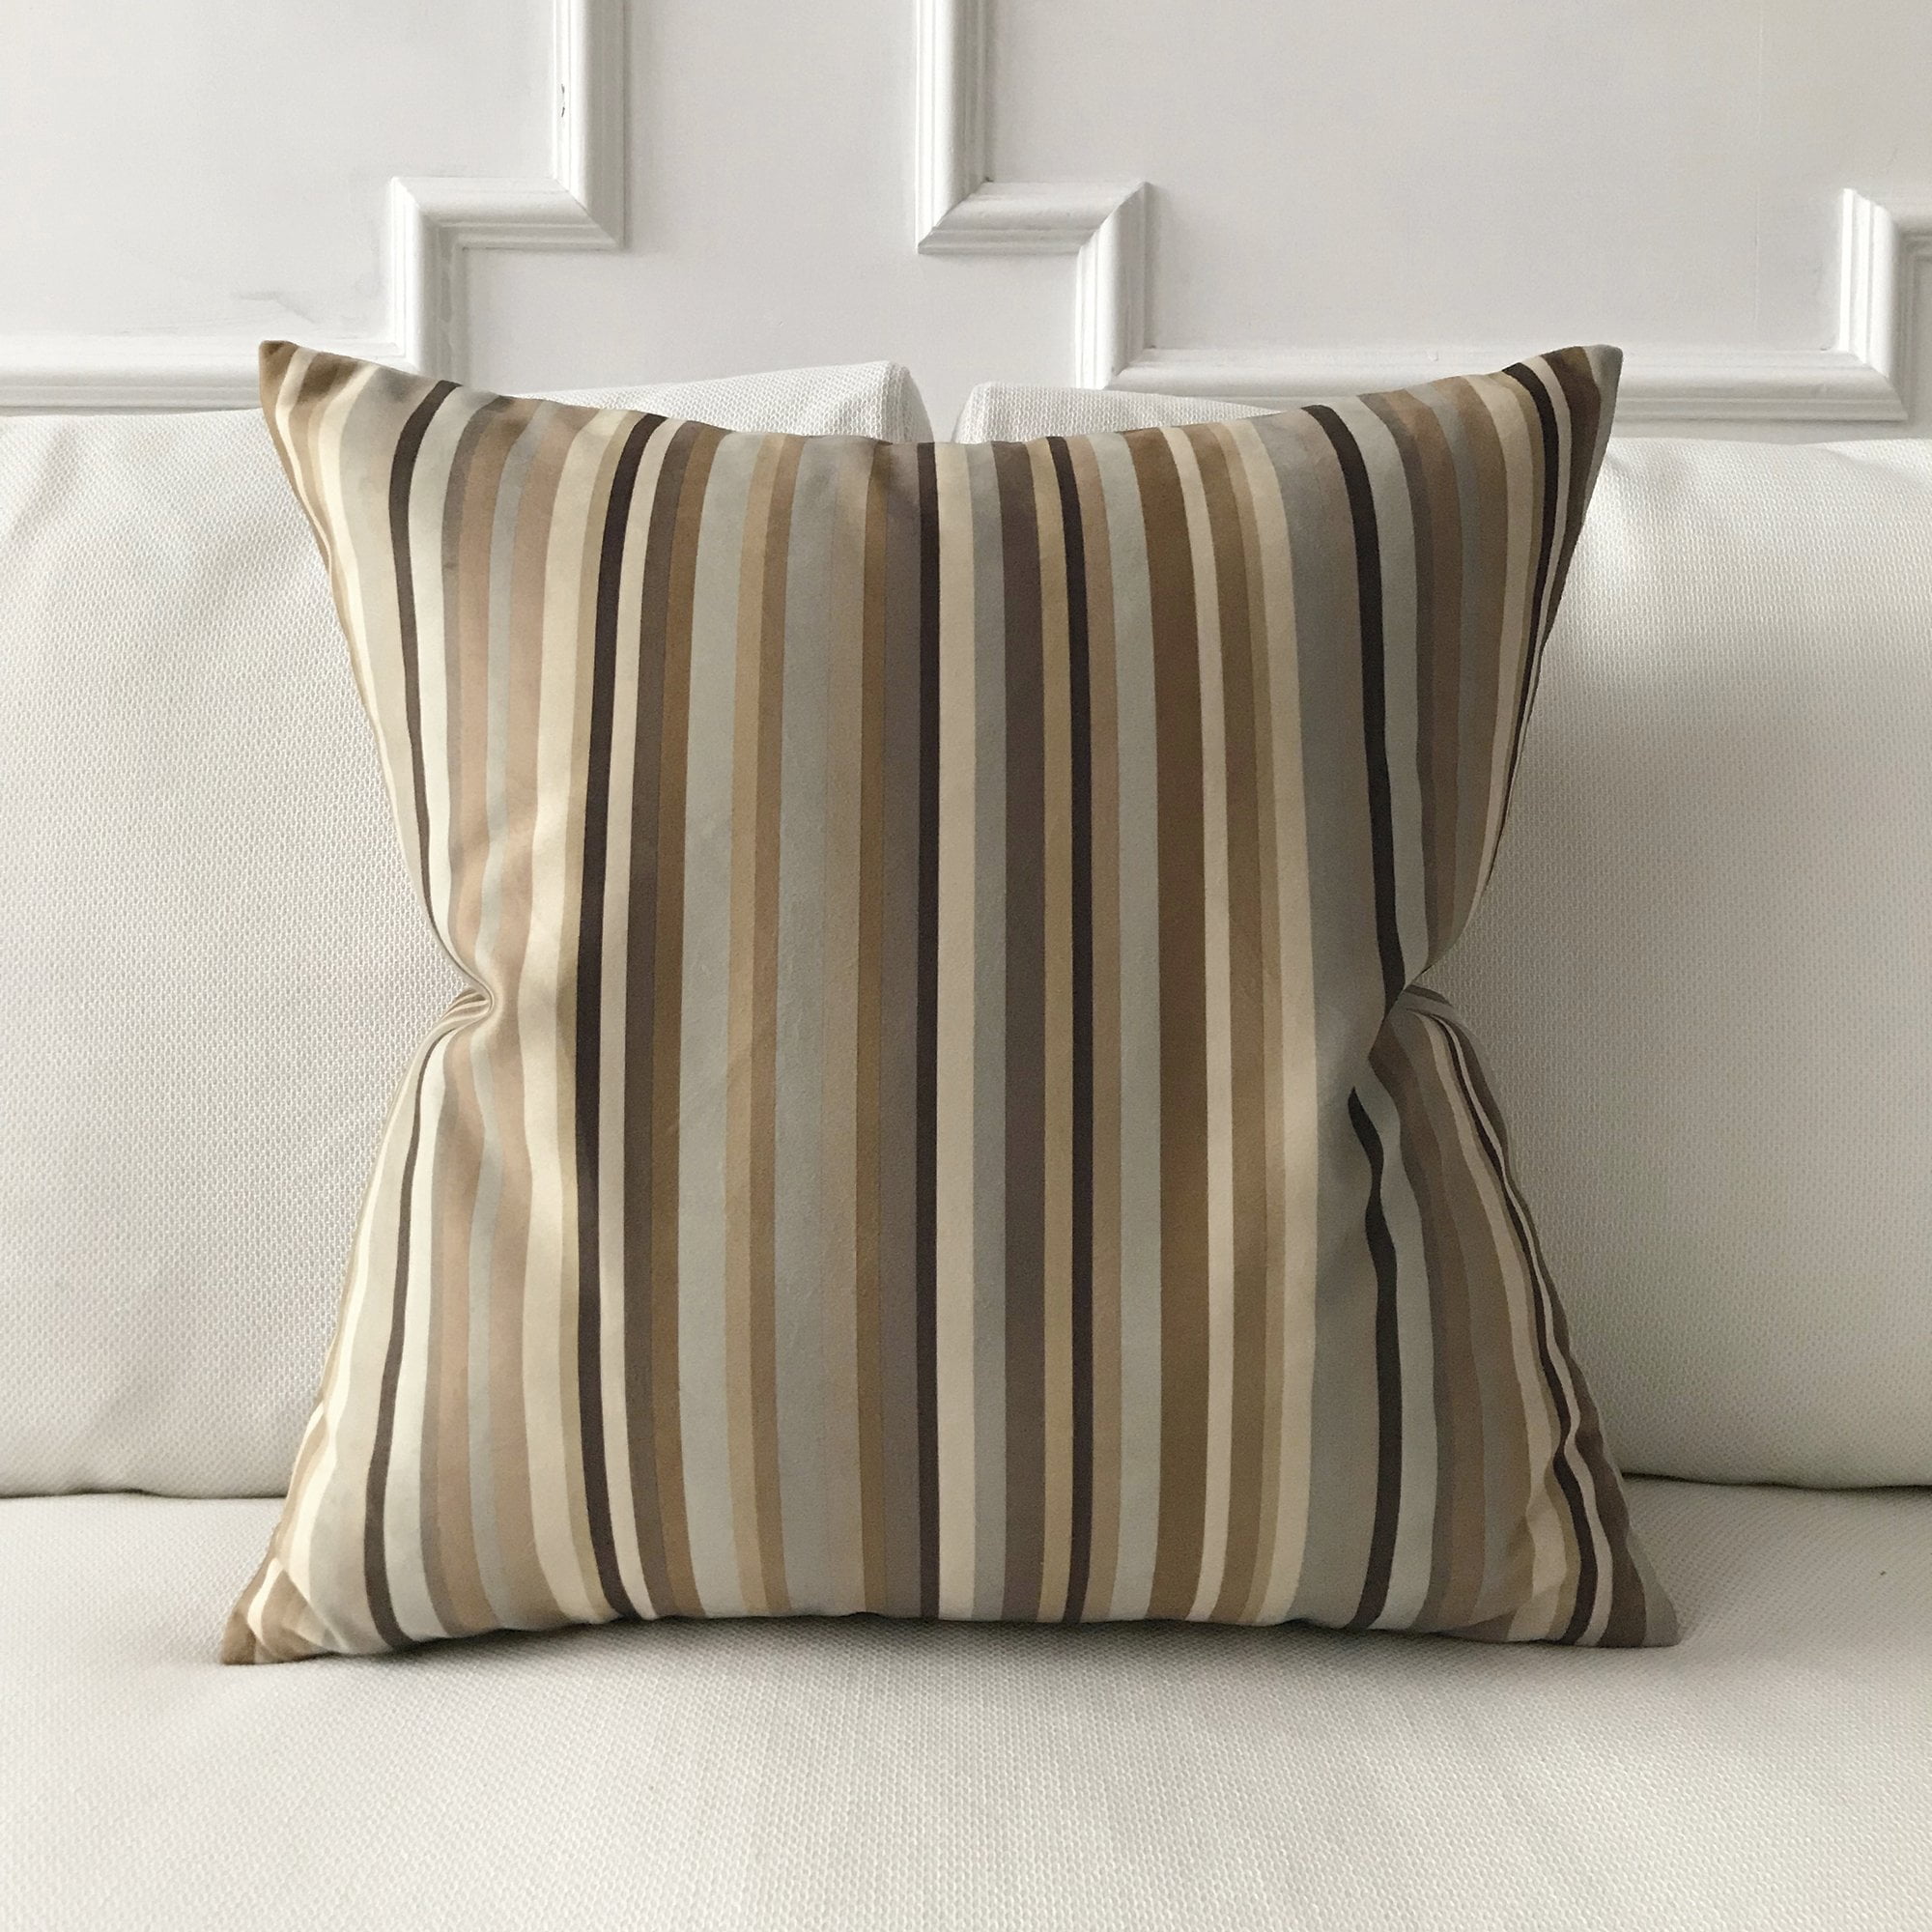 Modern Neutral Woven Striped Decorative Pillow Cover 22